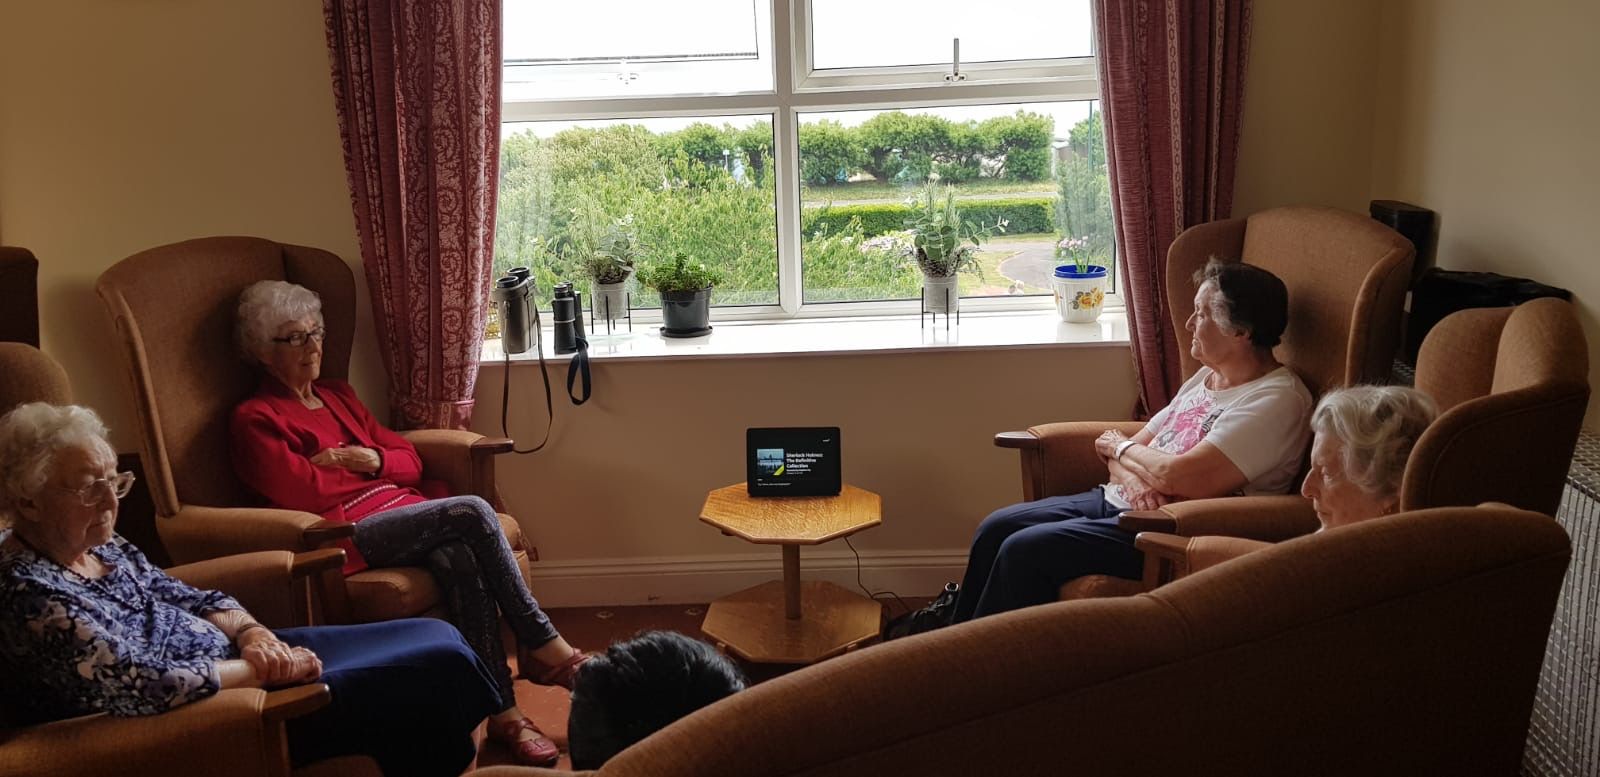 Care homes get 21st Century makeover thanks to Alexa and VR image 1